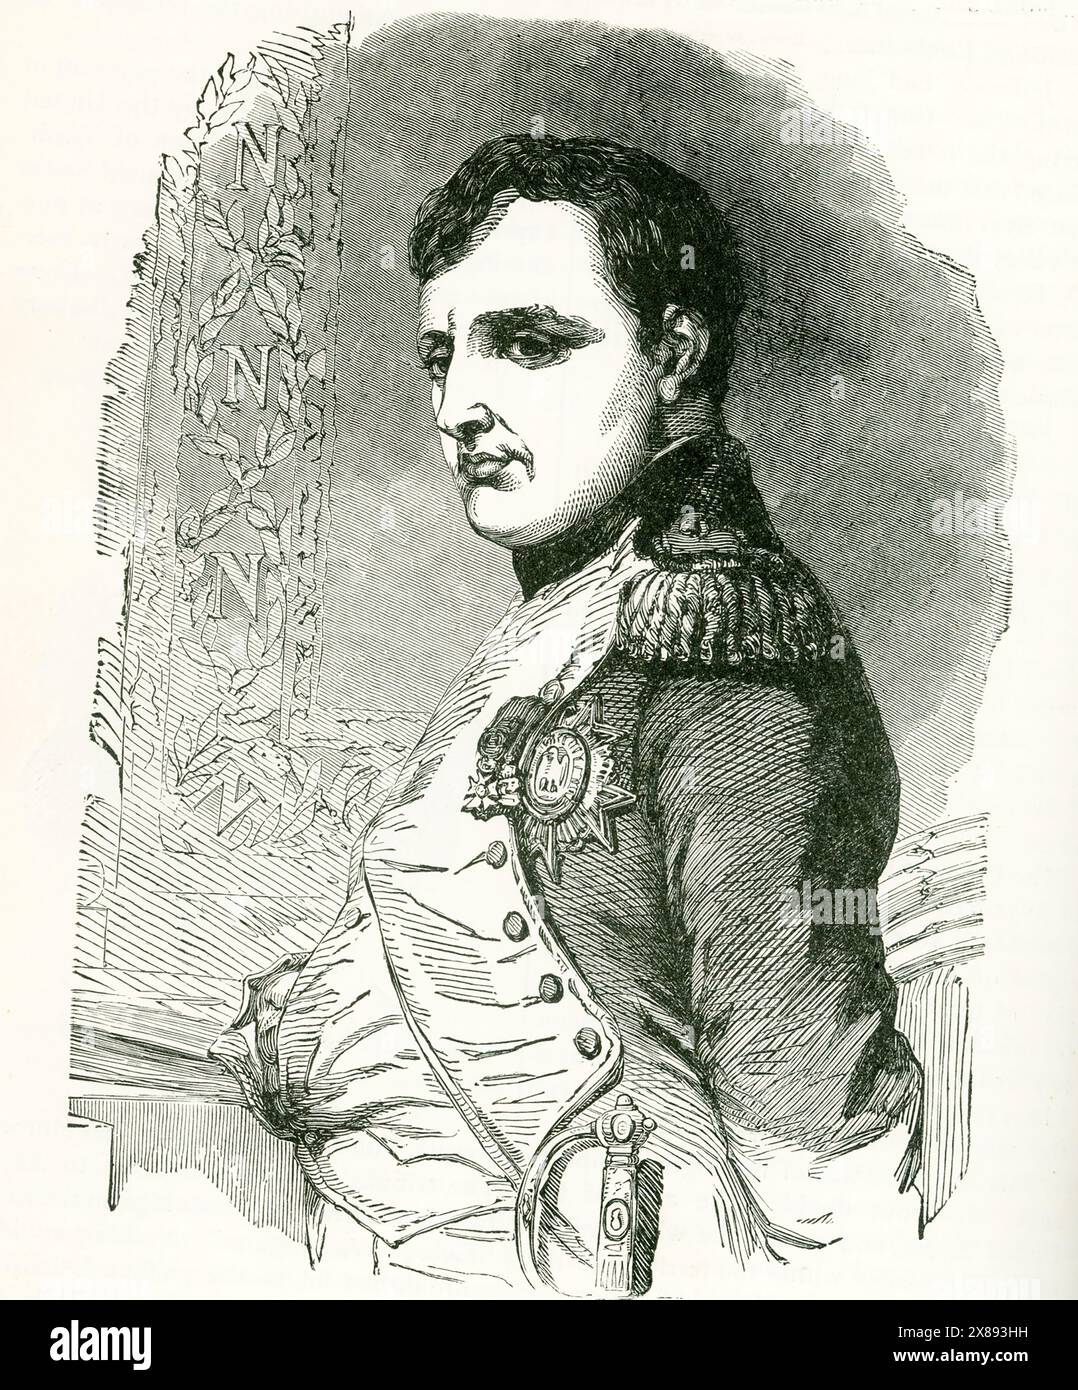 Napoleon Bonaparte (1769–1821) was a French military and political leader who became the emperor of France.  Also known as Napoleon I, he conquered much of Europe in the early 19th century. Born on the island of Corsica, Napoleon rapidly rose through the ranks of the military during the French Revolution (1789-1799). After seizing political power in France in a 1799 coup d’état, he crowned himself emperor in 1804. Stock Photo